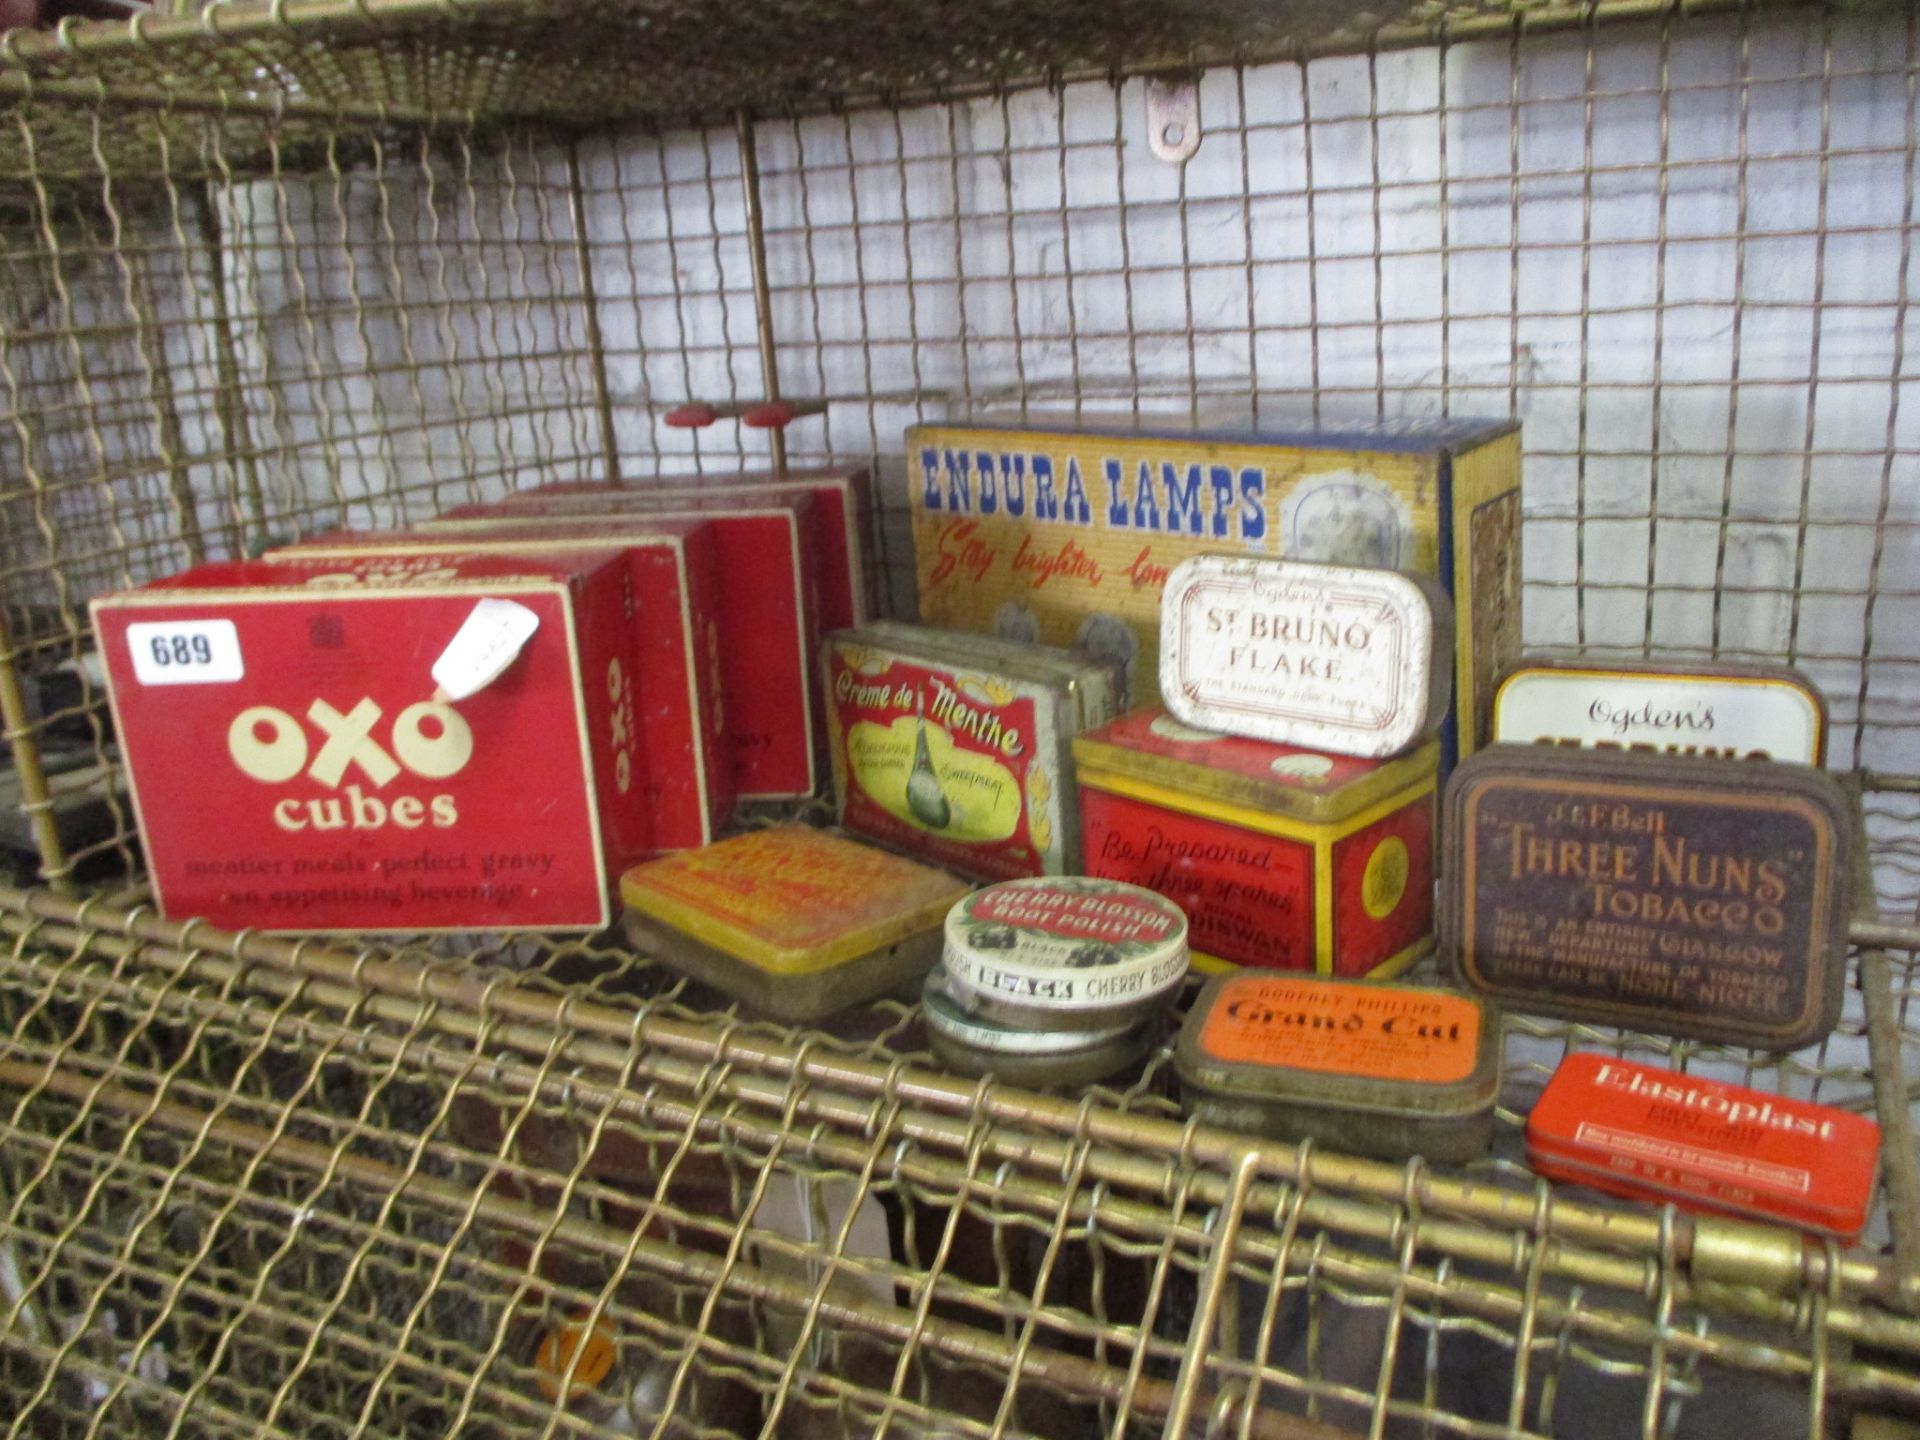 Vintage tins incl. OXO, Edura lamps and others